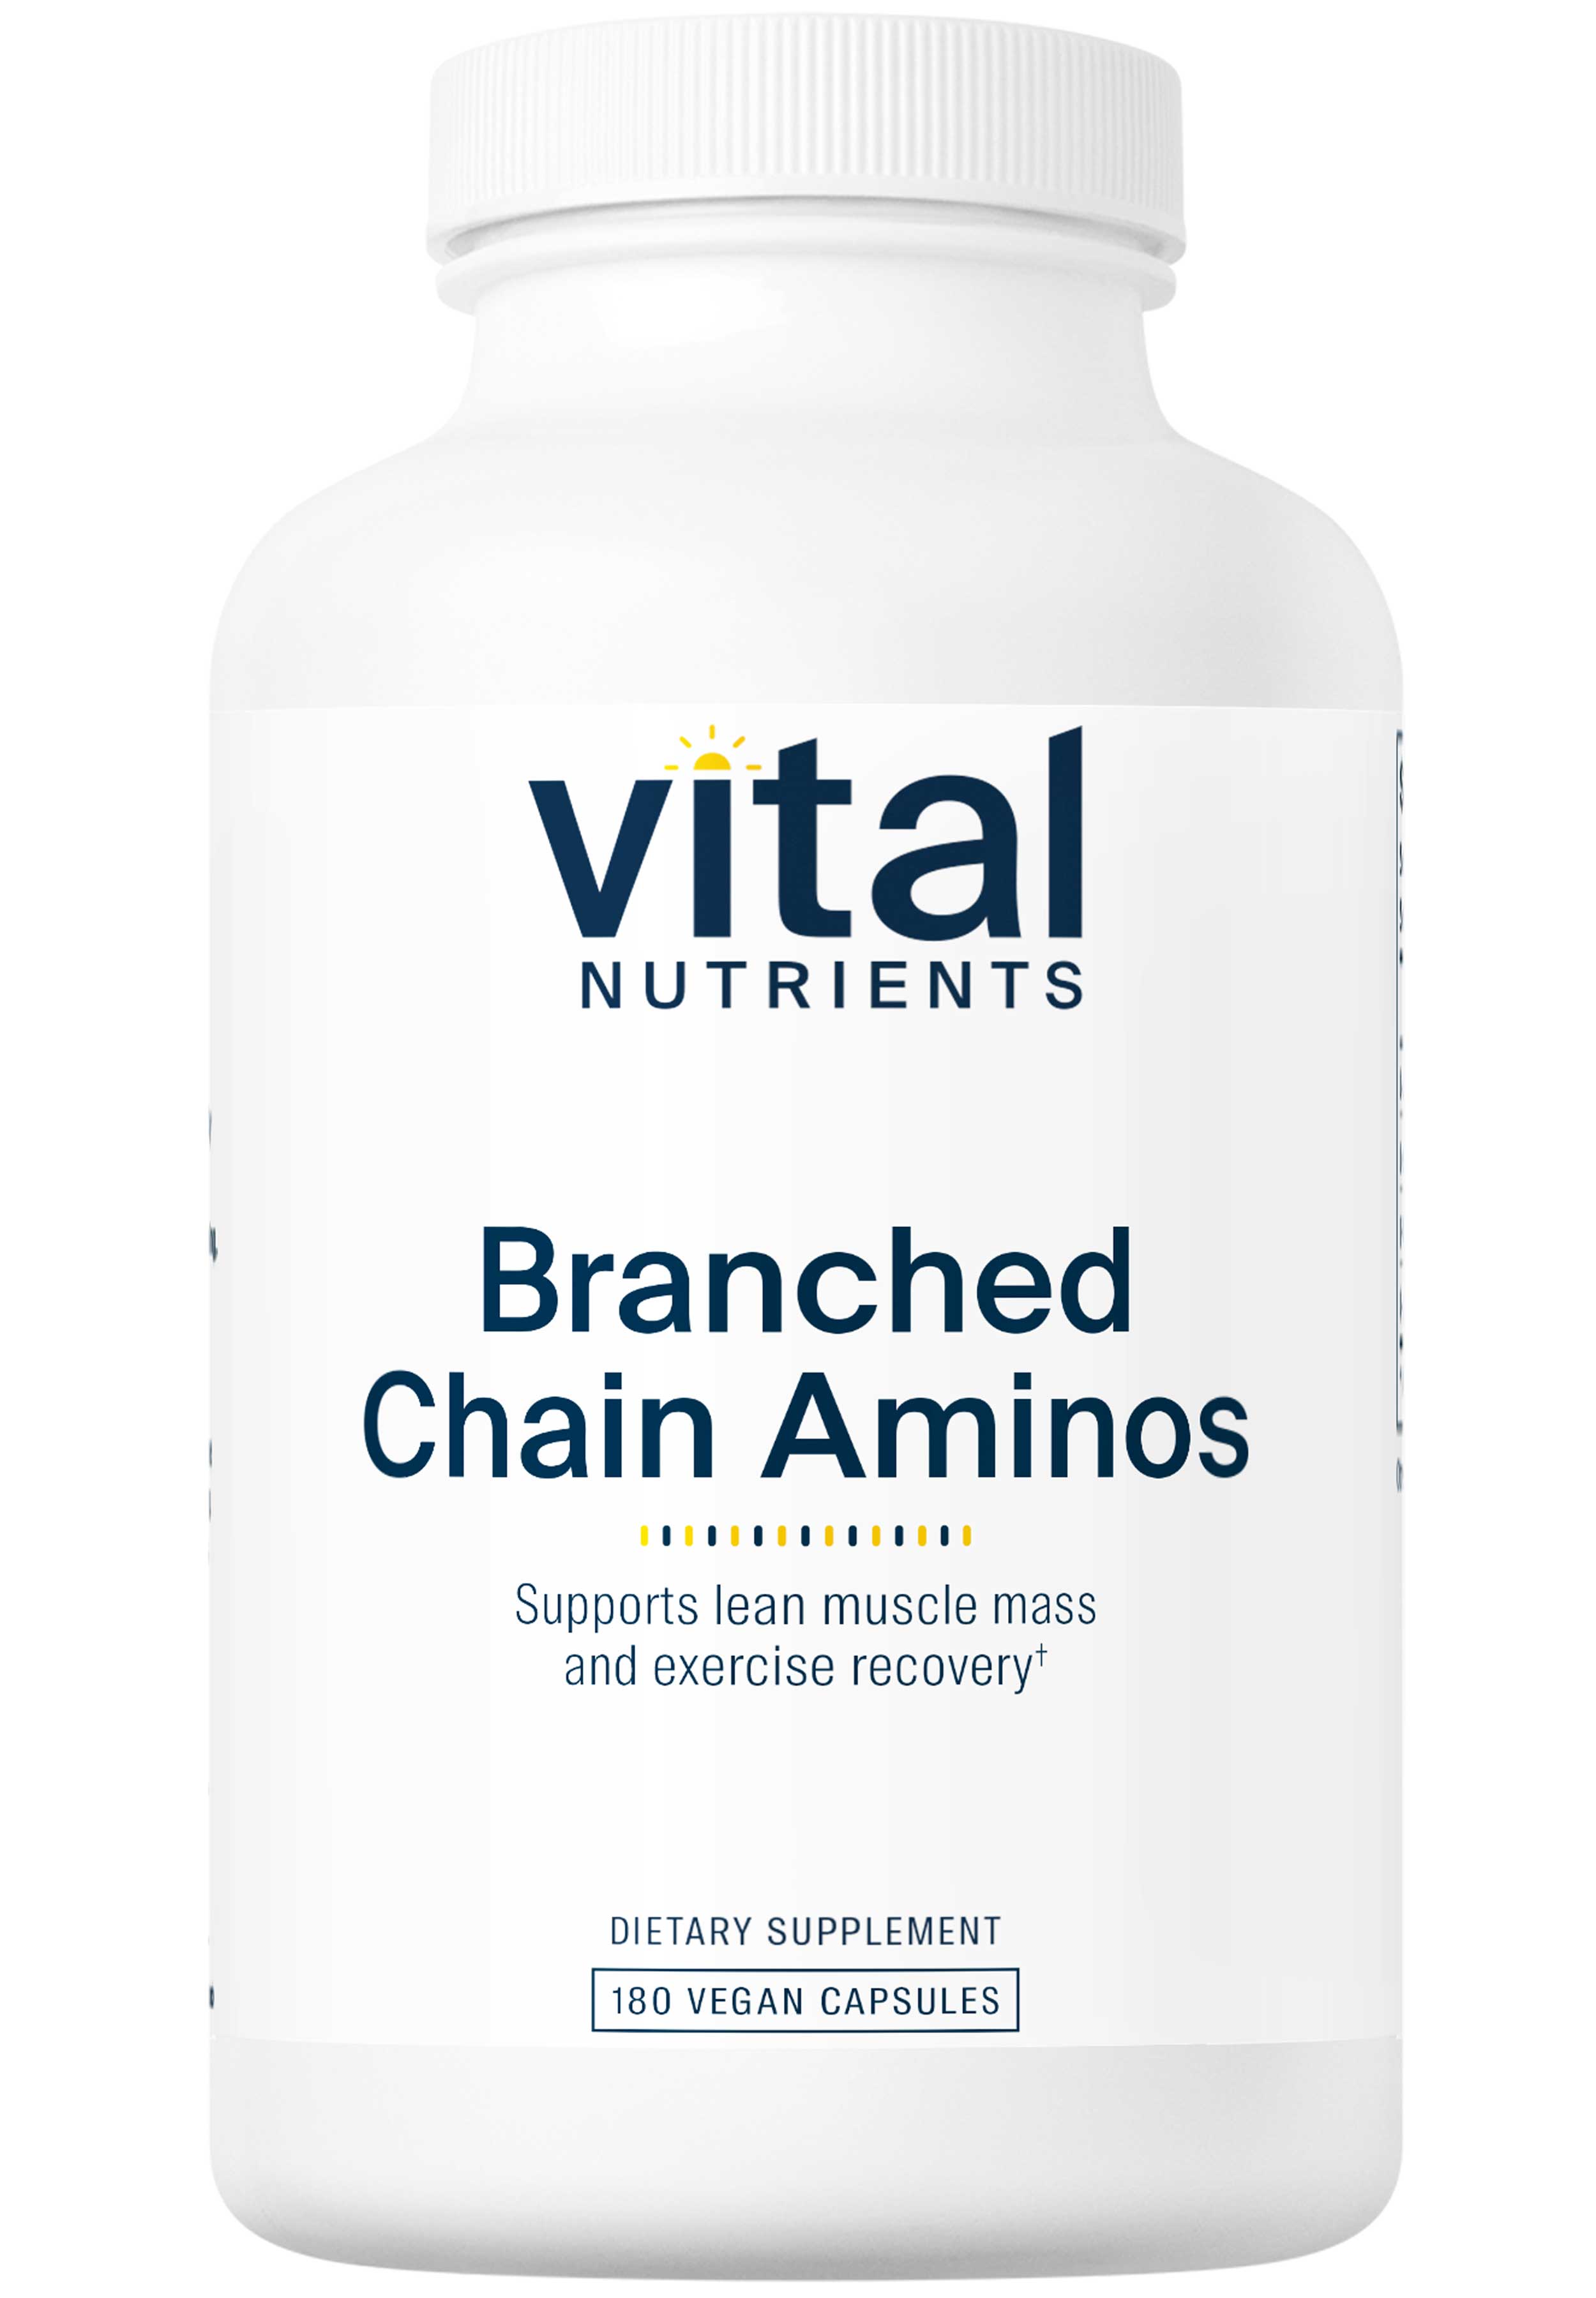 Vital Nutrients Branched Chain Aminos